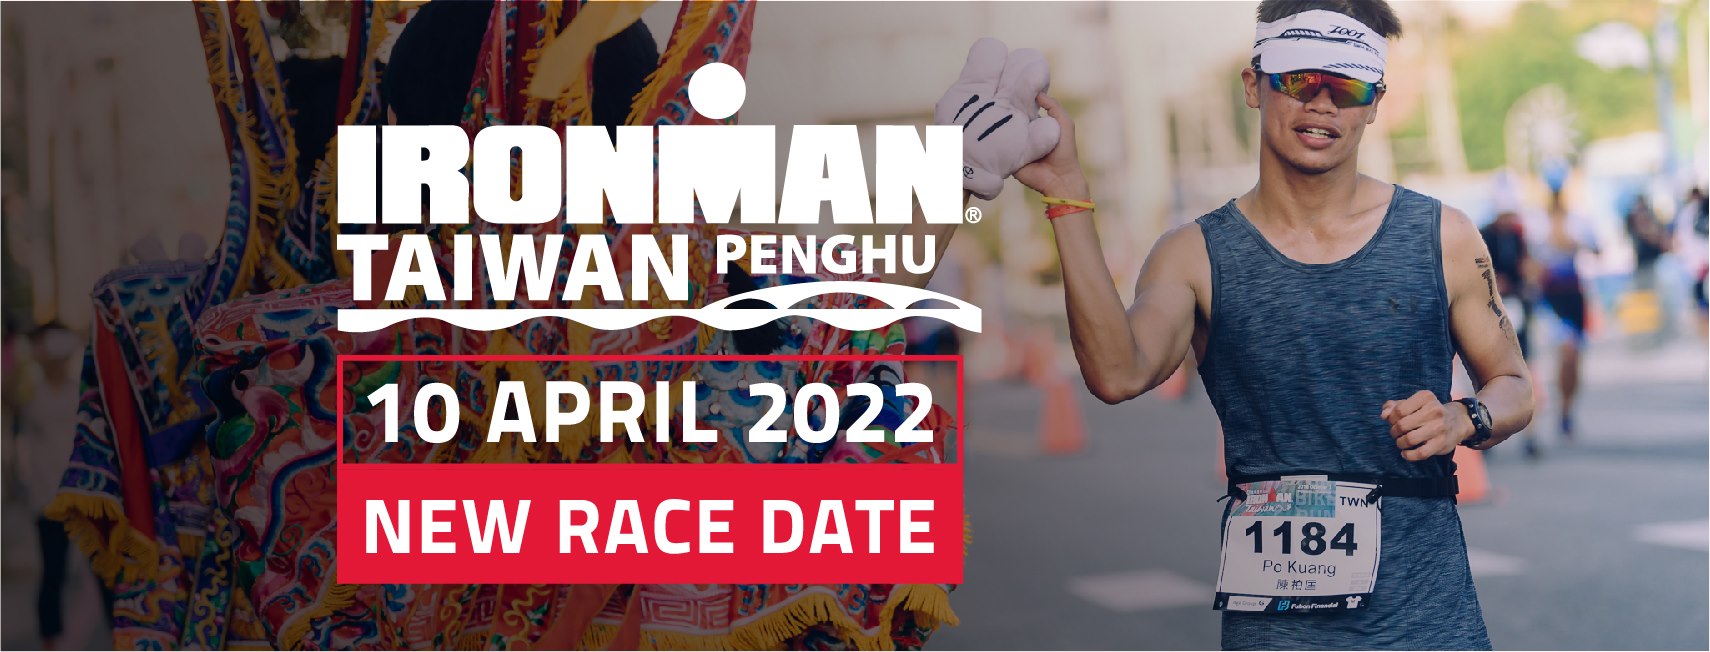 As Challenge Taiwan prepares for 6,000, Ironman Taiwan is cancelled